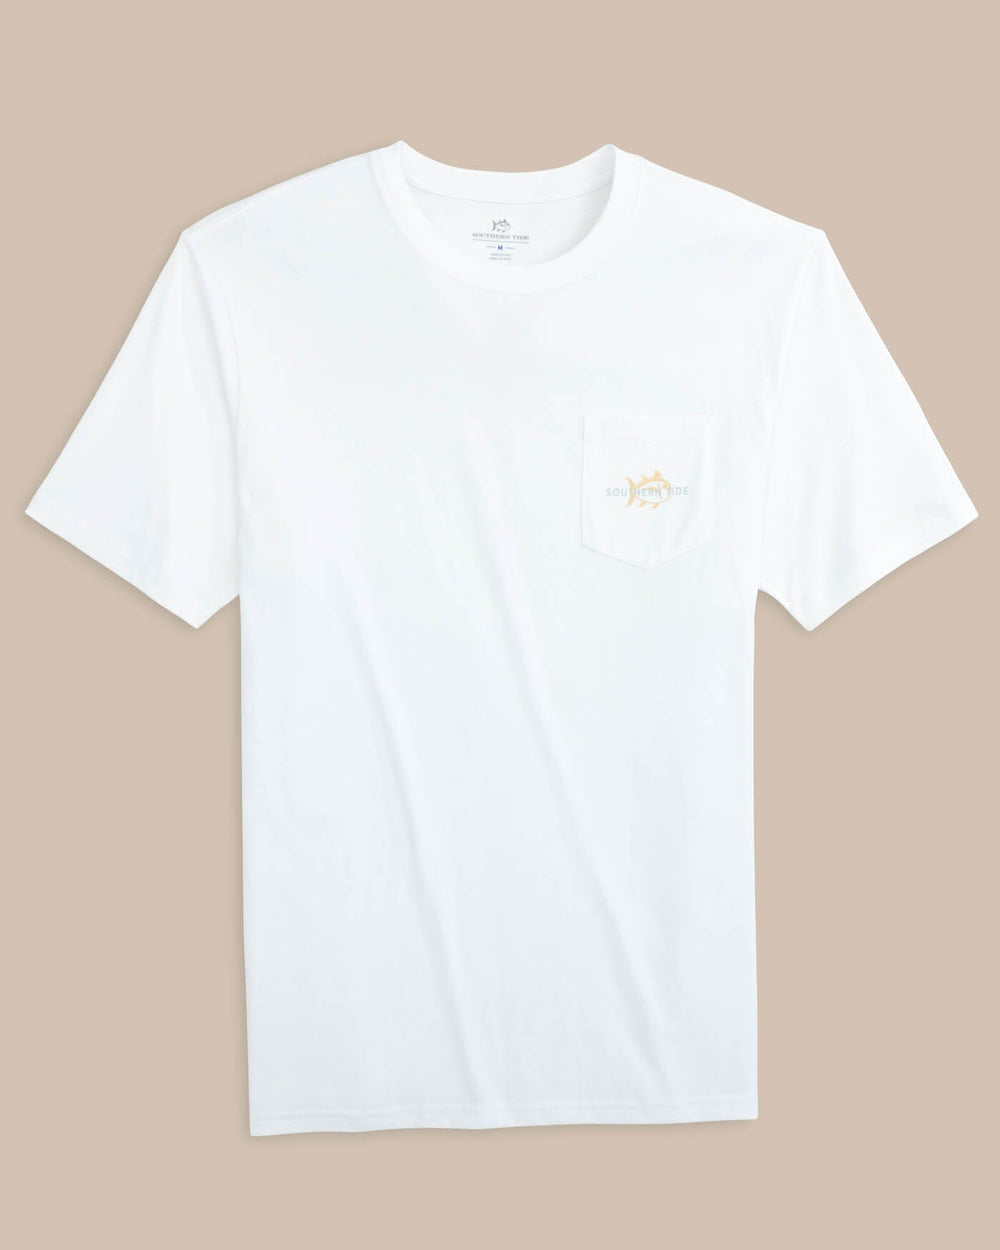 The front view of the Southern Tide Sunset Split Short Sleeve T-Shirt by Southern Tide - Classic White